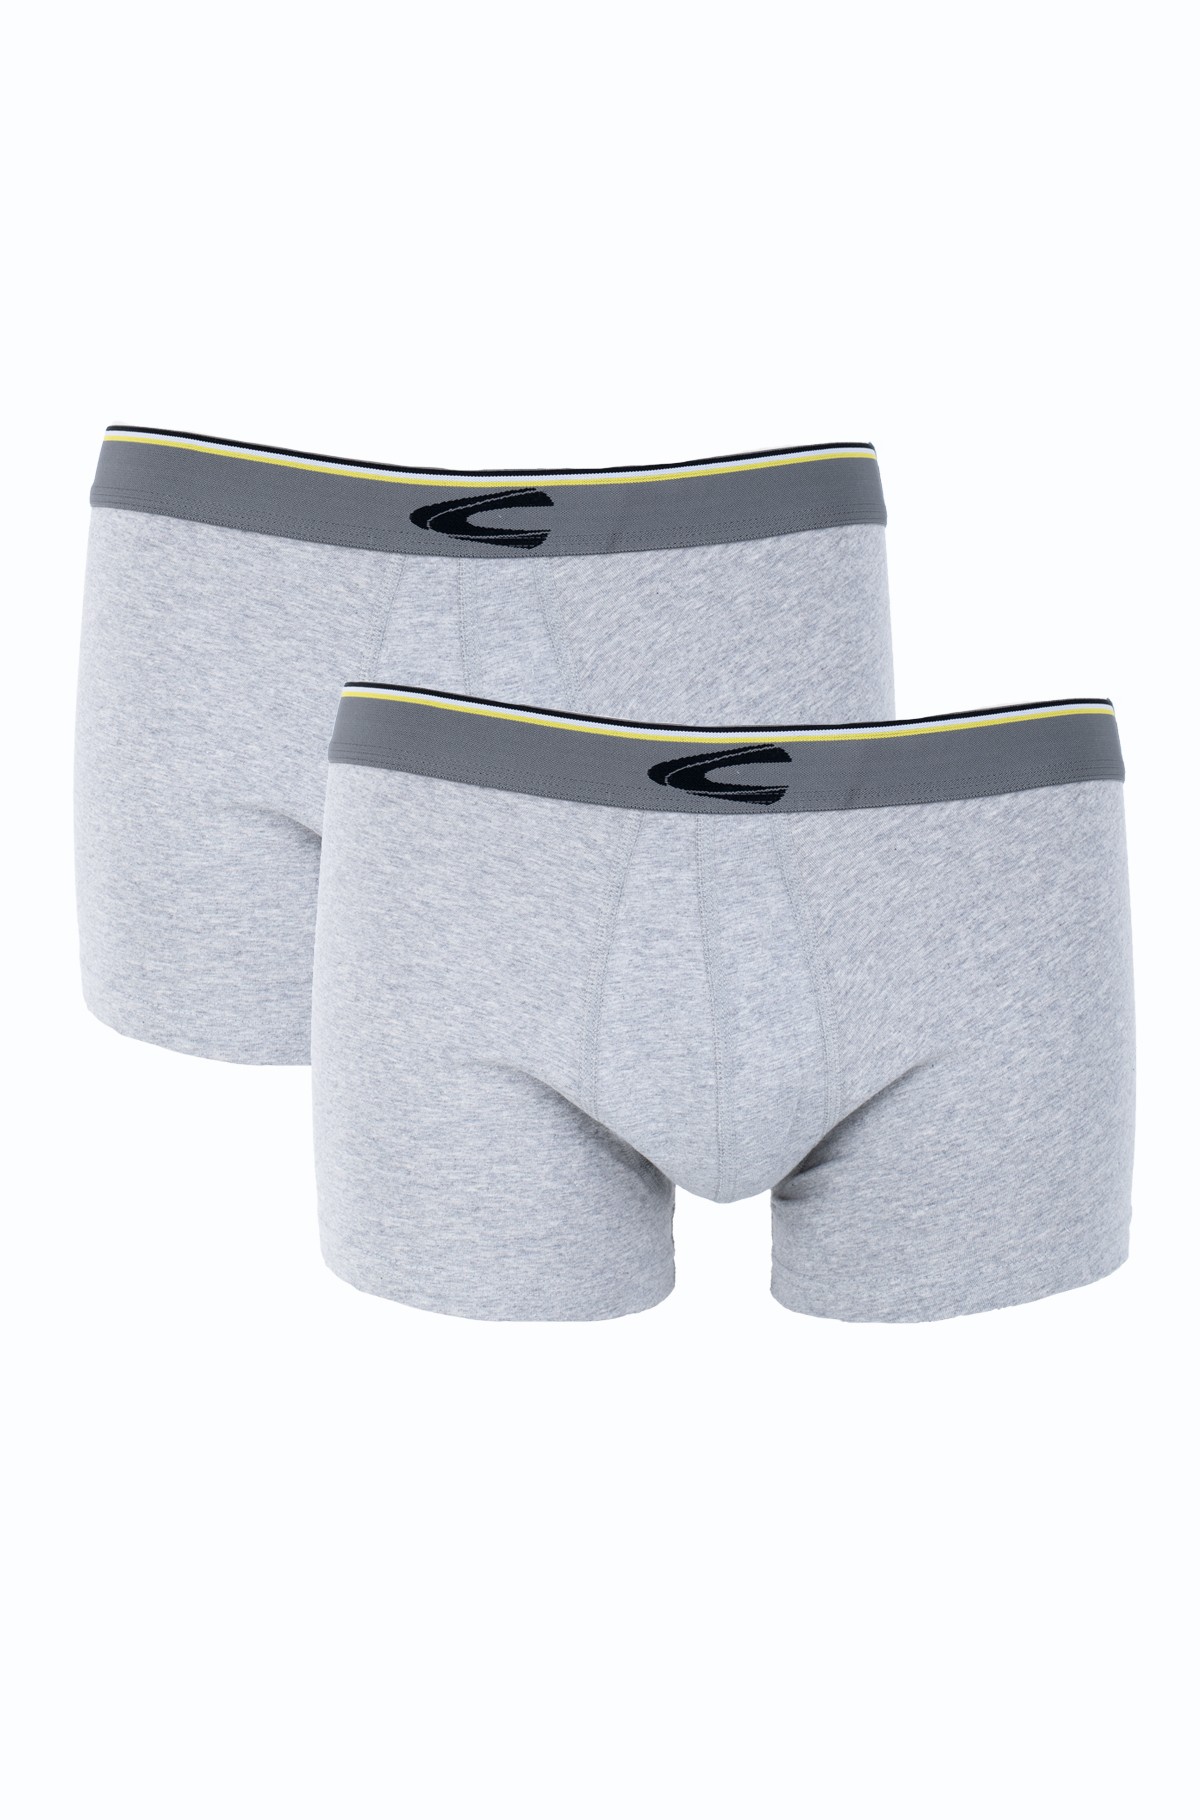 Two pairs of boxers 400610/9A61-full-1